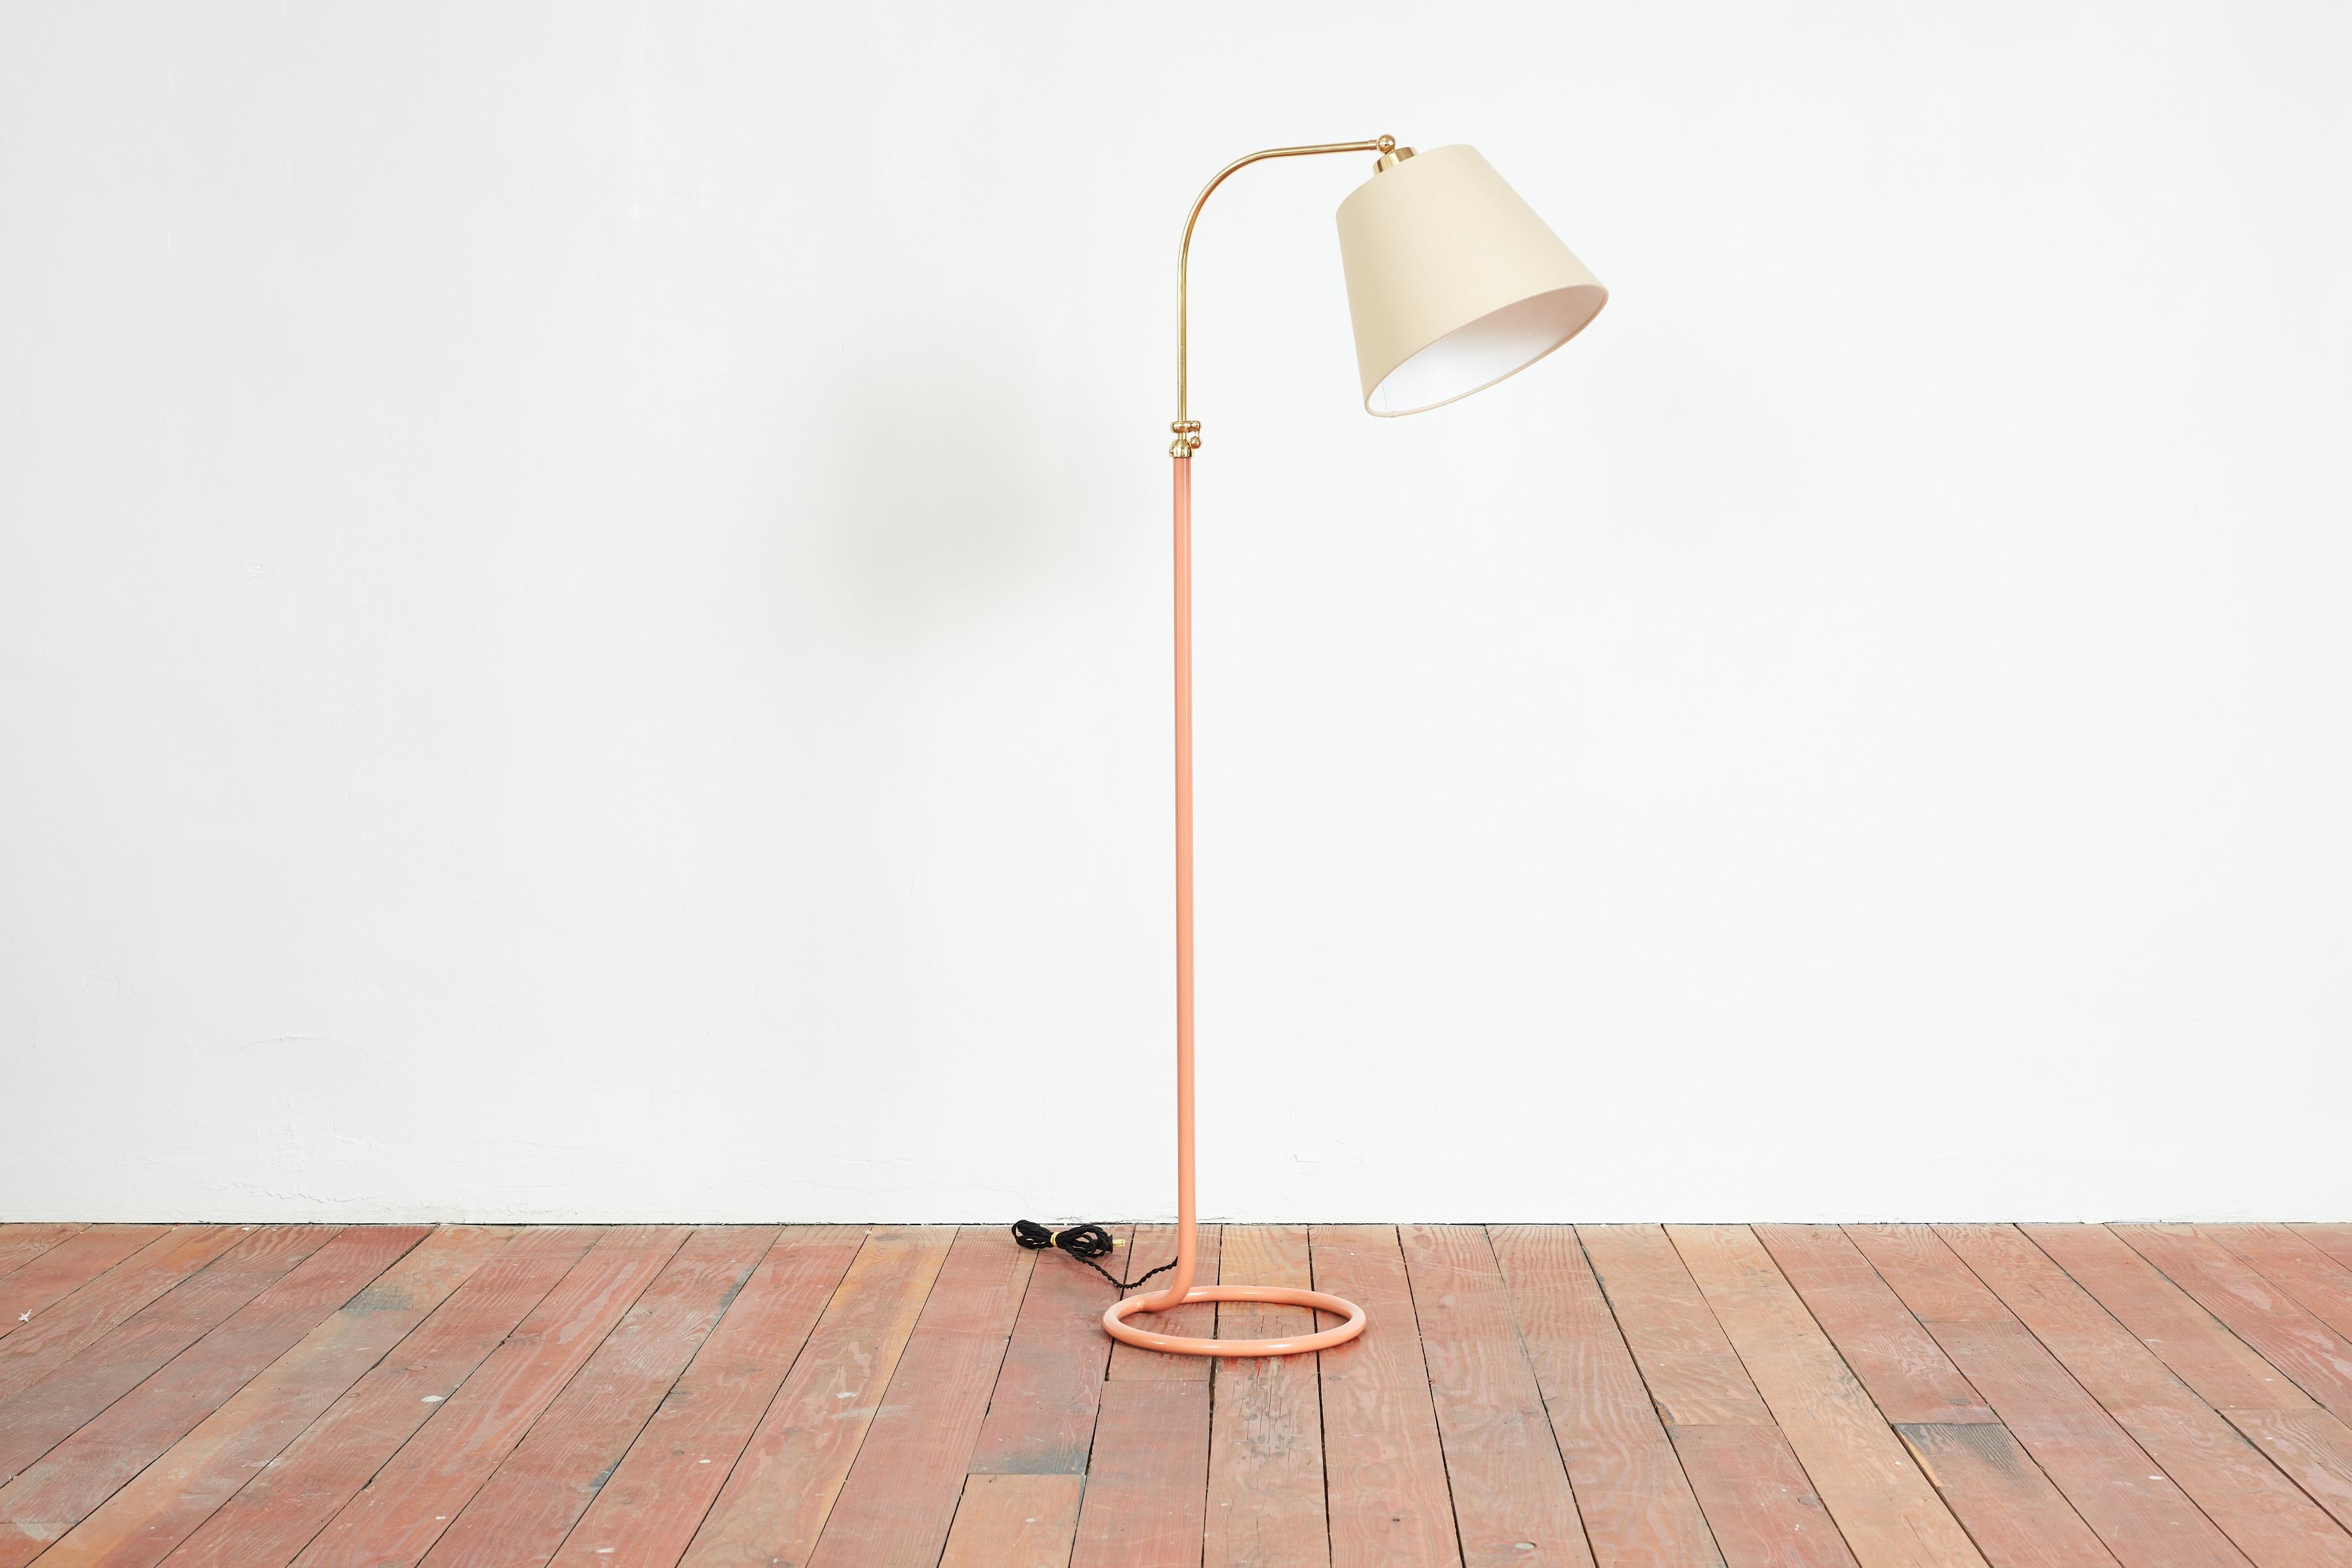 1940s French Floor Lamp with circular iron base 
Newly refinished with peach powder coated paint
New linen shade
Adjustable in height with brass hardware 
Height 54